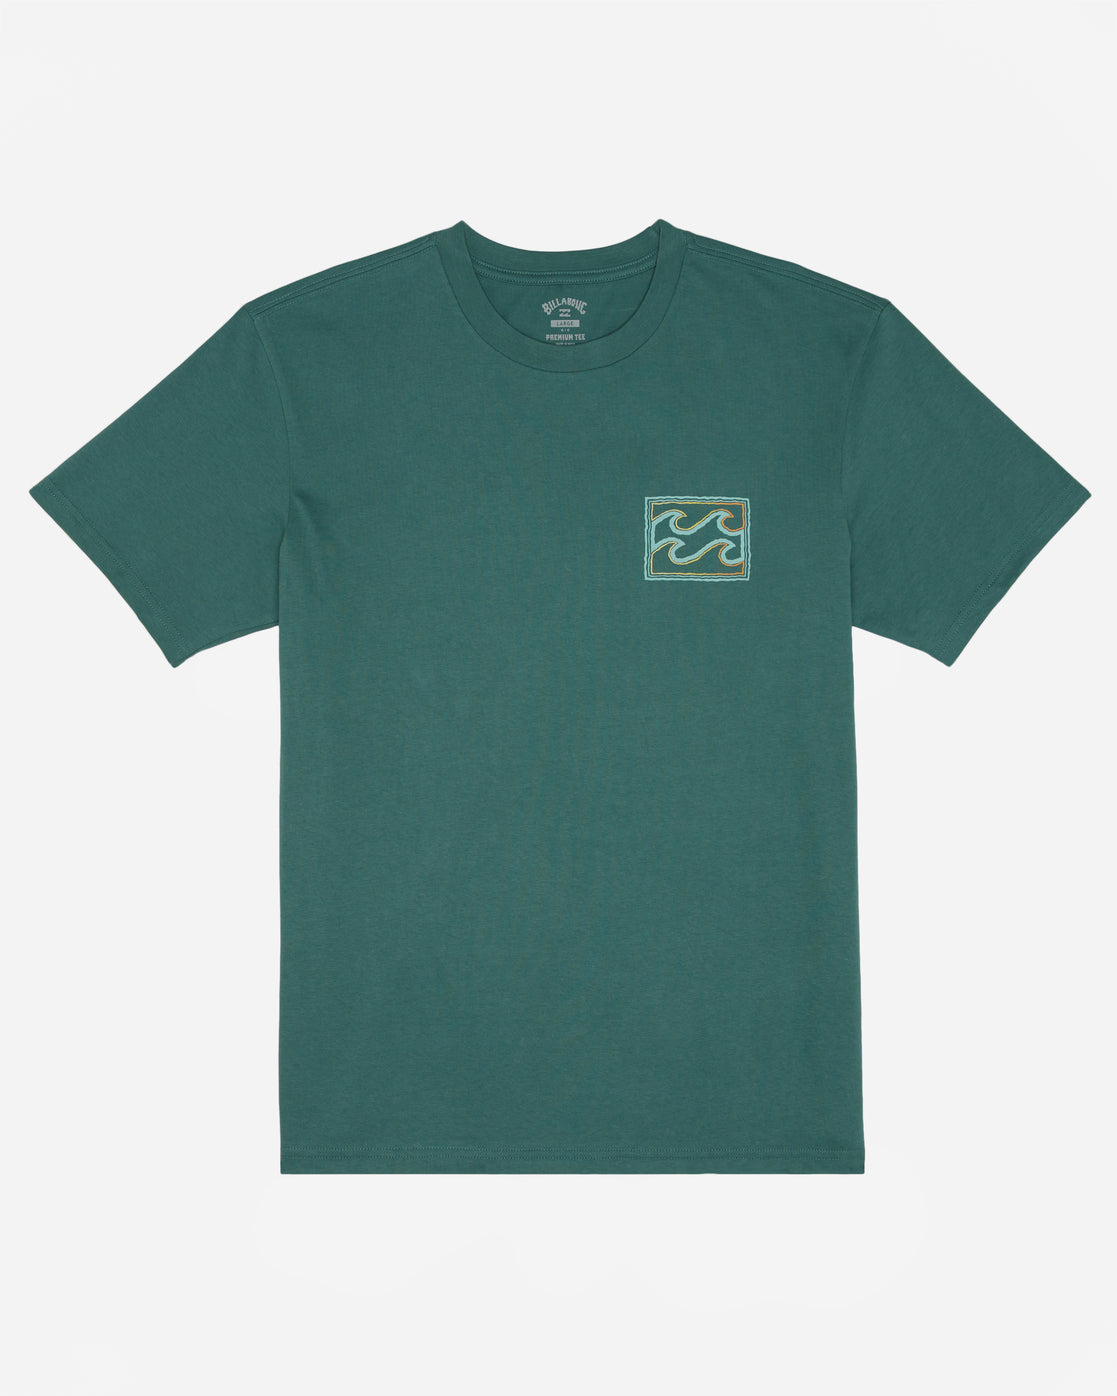 Billabong Crayon Wave Tee in billiard colourway from front